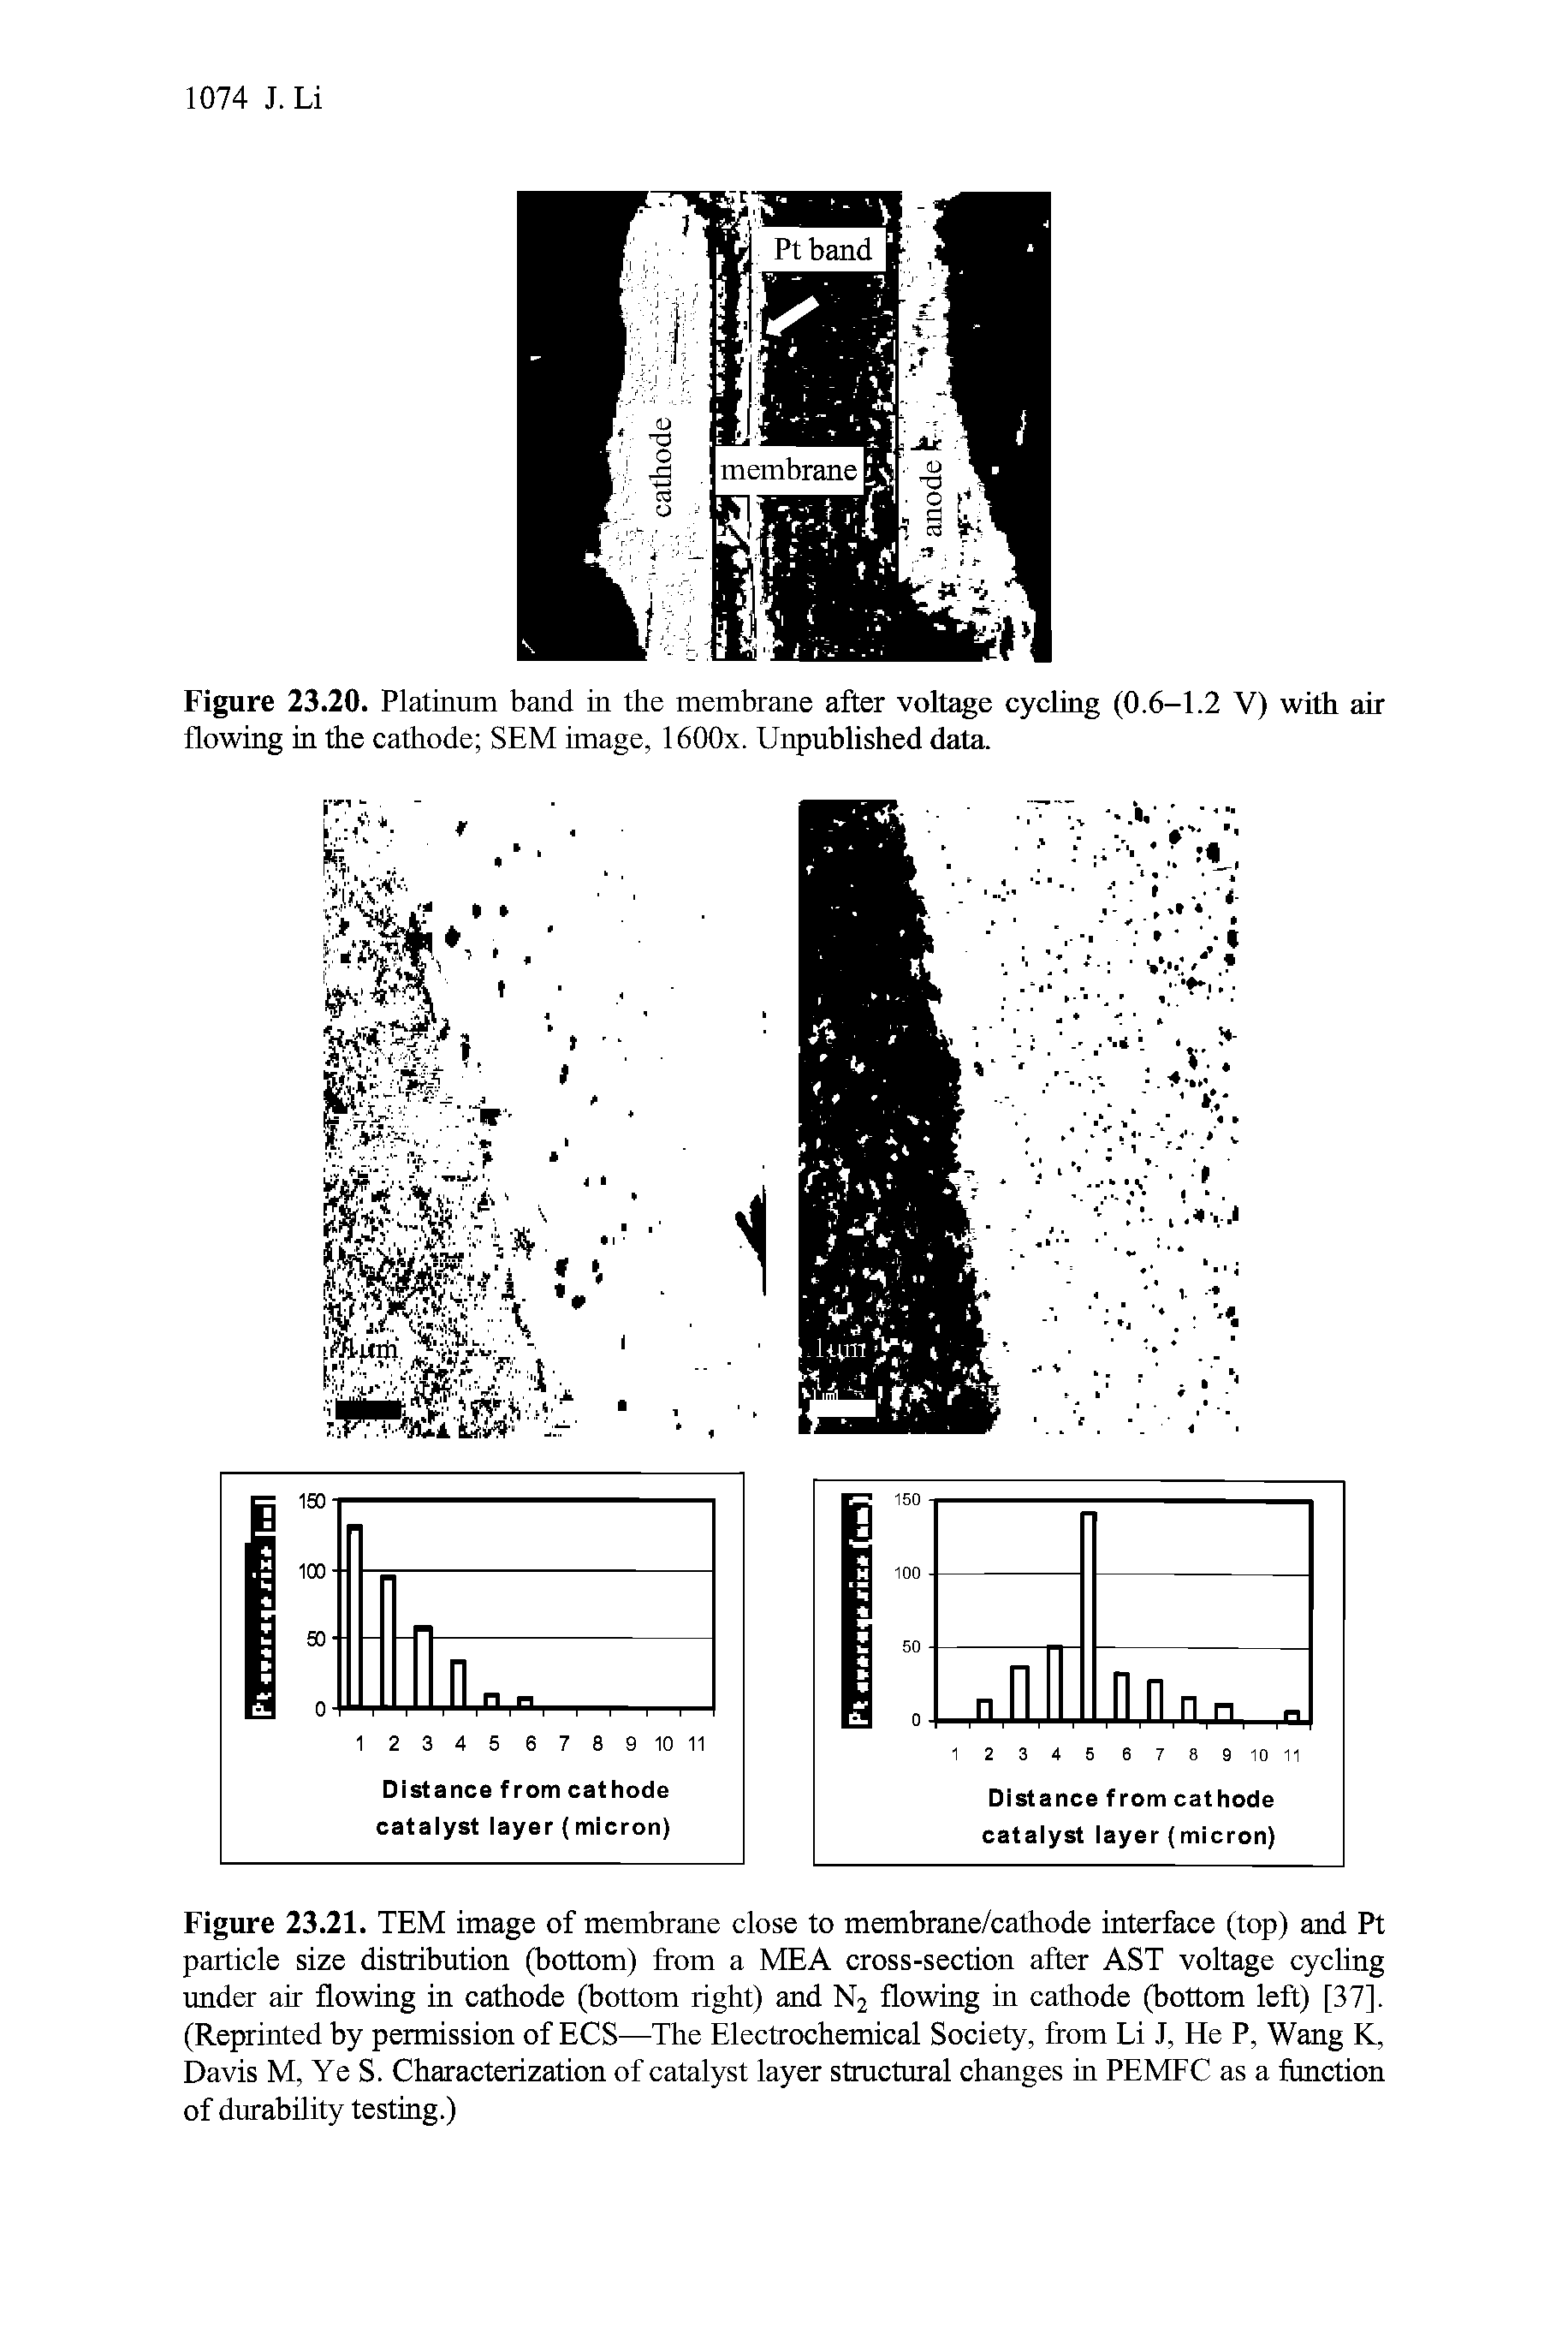 Figure 23.21. TEM image of membrane close to membrane/cathode interface (top) and Pt particle size distribution (bottom) from a MEA cross-section after AST voltage cycling xmder air flowing in cathode (bottom right) and N2 flowing in cathode (bottom left) [37]. (Reprinted by permission of ECS—The Electrochemical Society, from Li J, He P, Wang K, Davis M, Ye S. Characterization of catalyst layer structural changes in PEMFC as a function of durability testing.)...